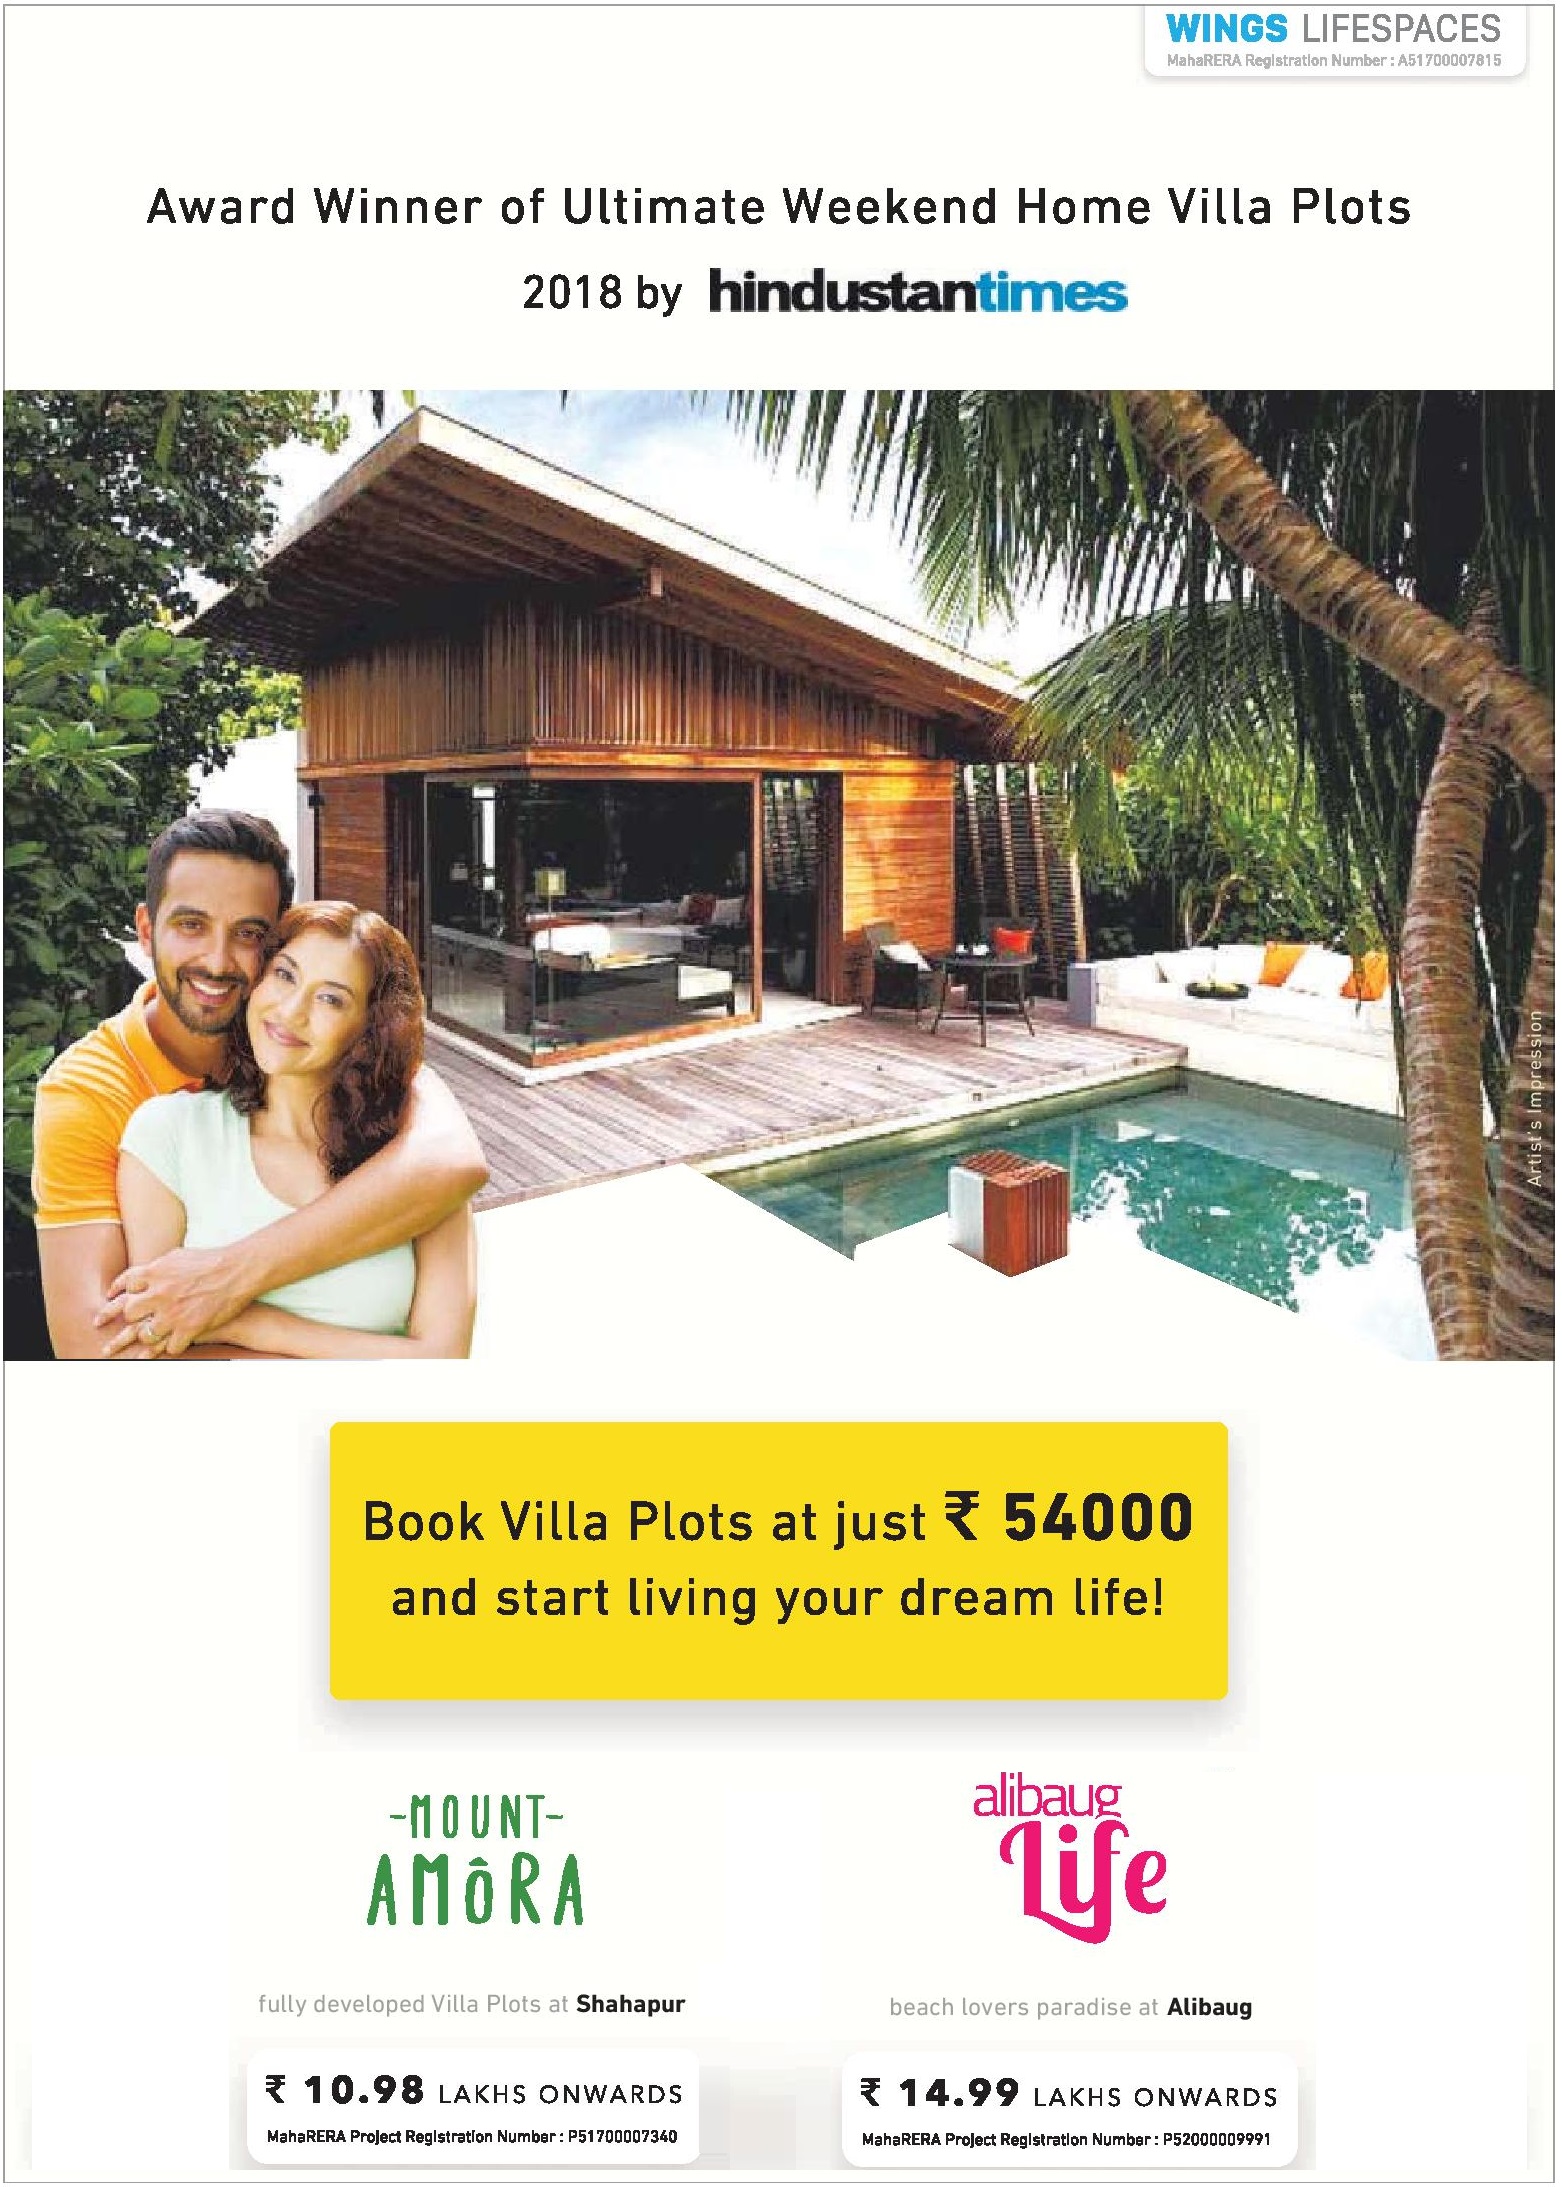 Book villa plots at Rs. 54000 & start living your dream life at Wings Project in Mumbai Update